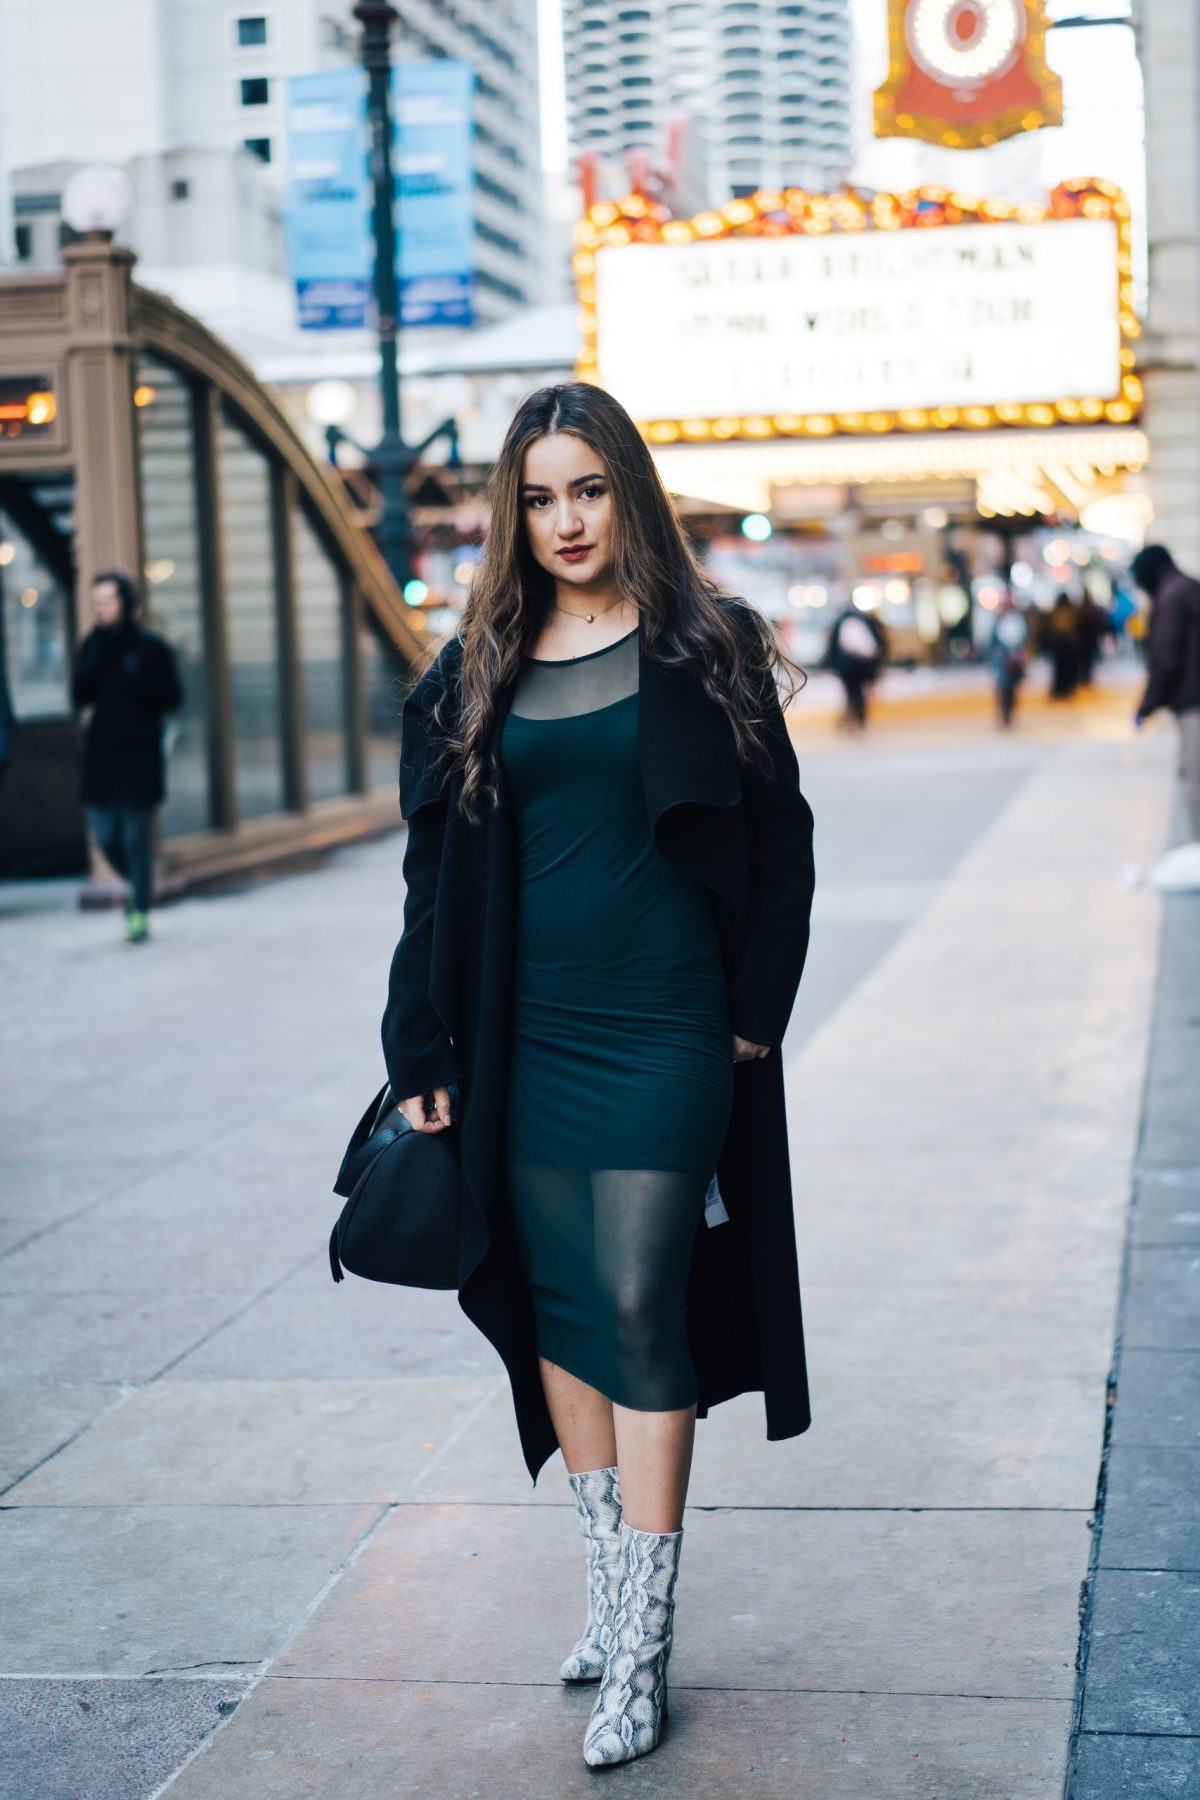 What should I wear for a plus size winter first date